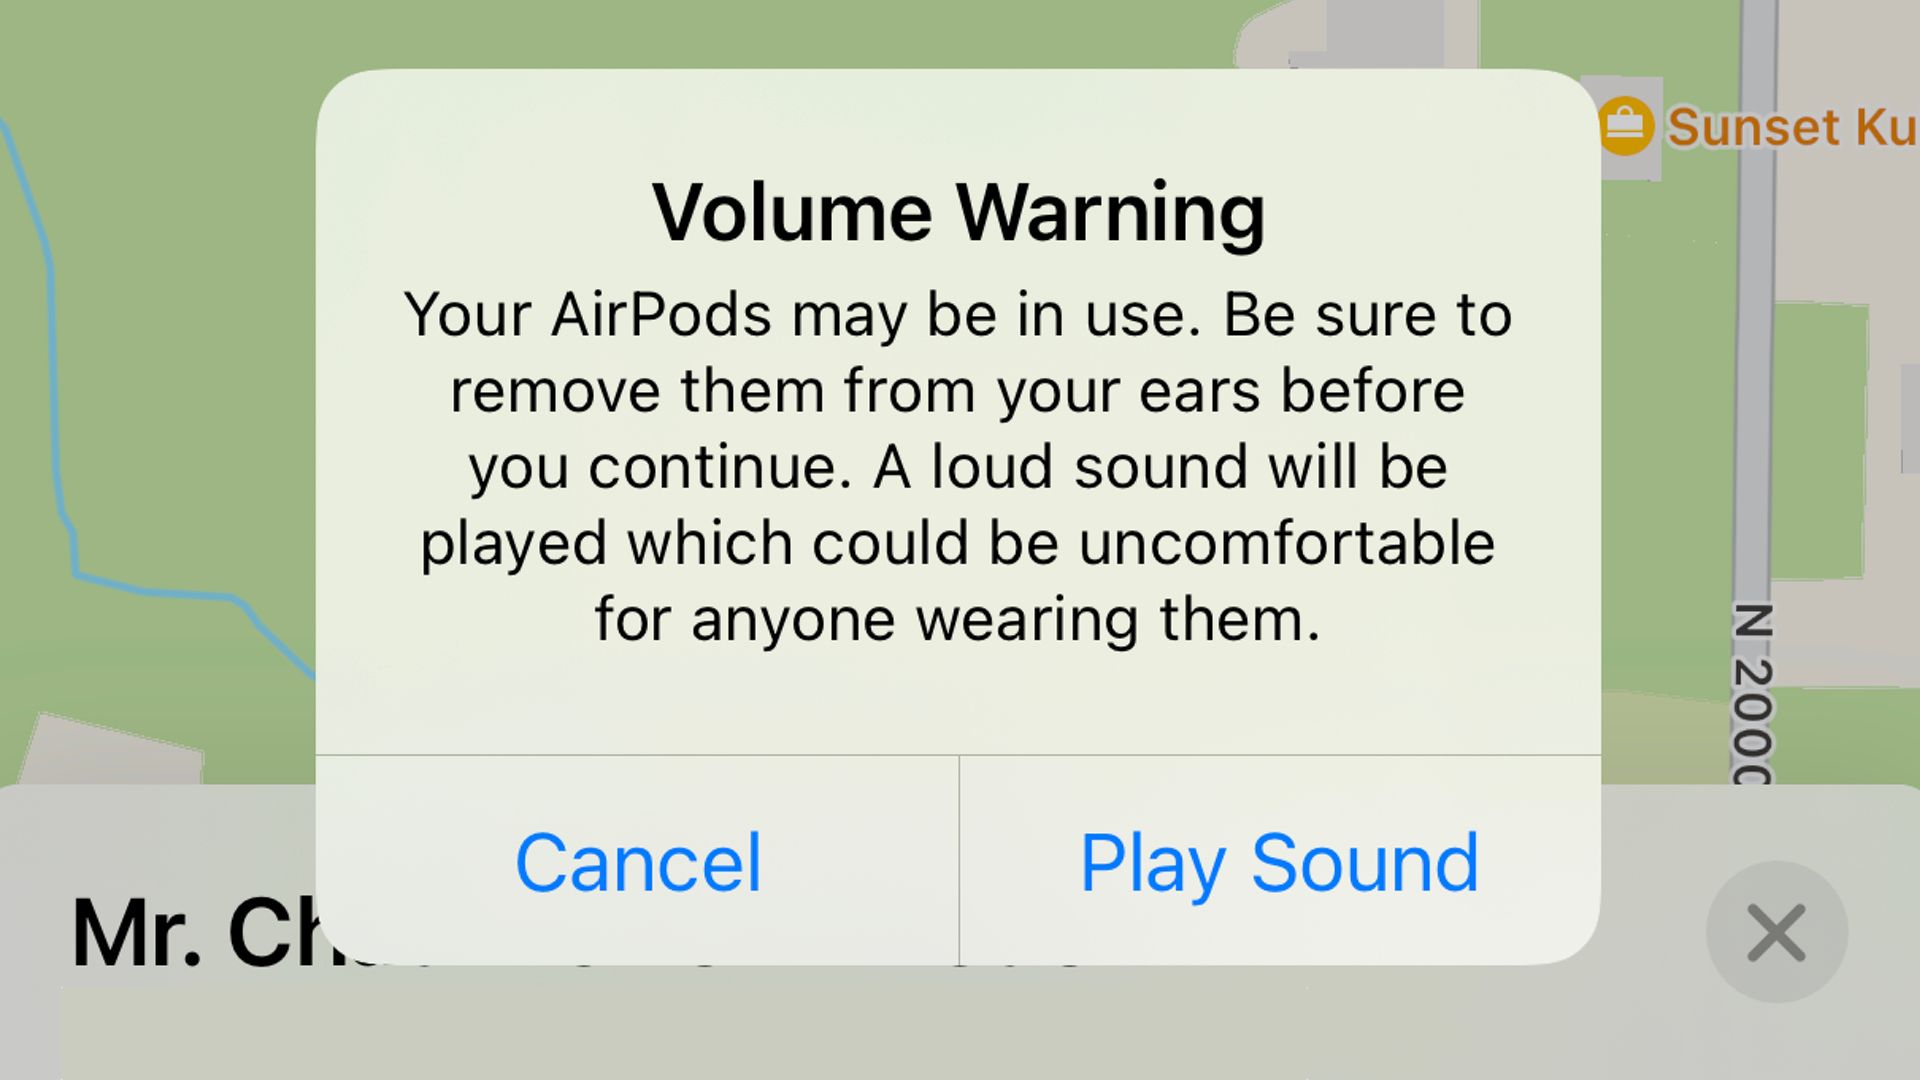 A volume warning displayed before playing a sound on lost AirPods.